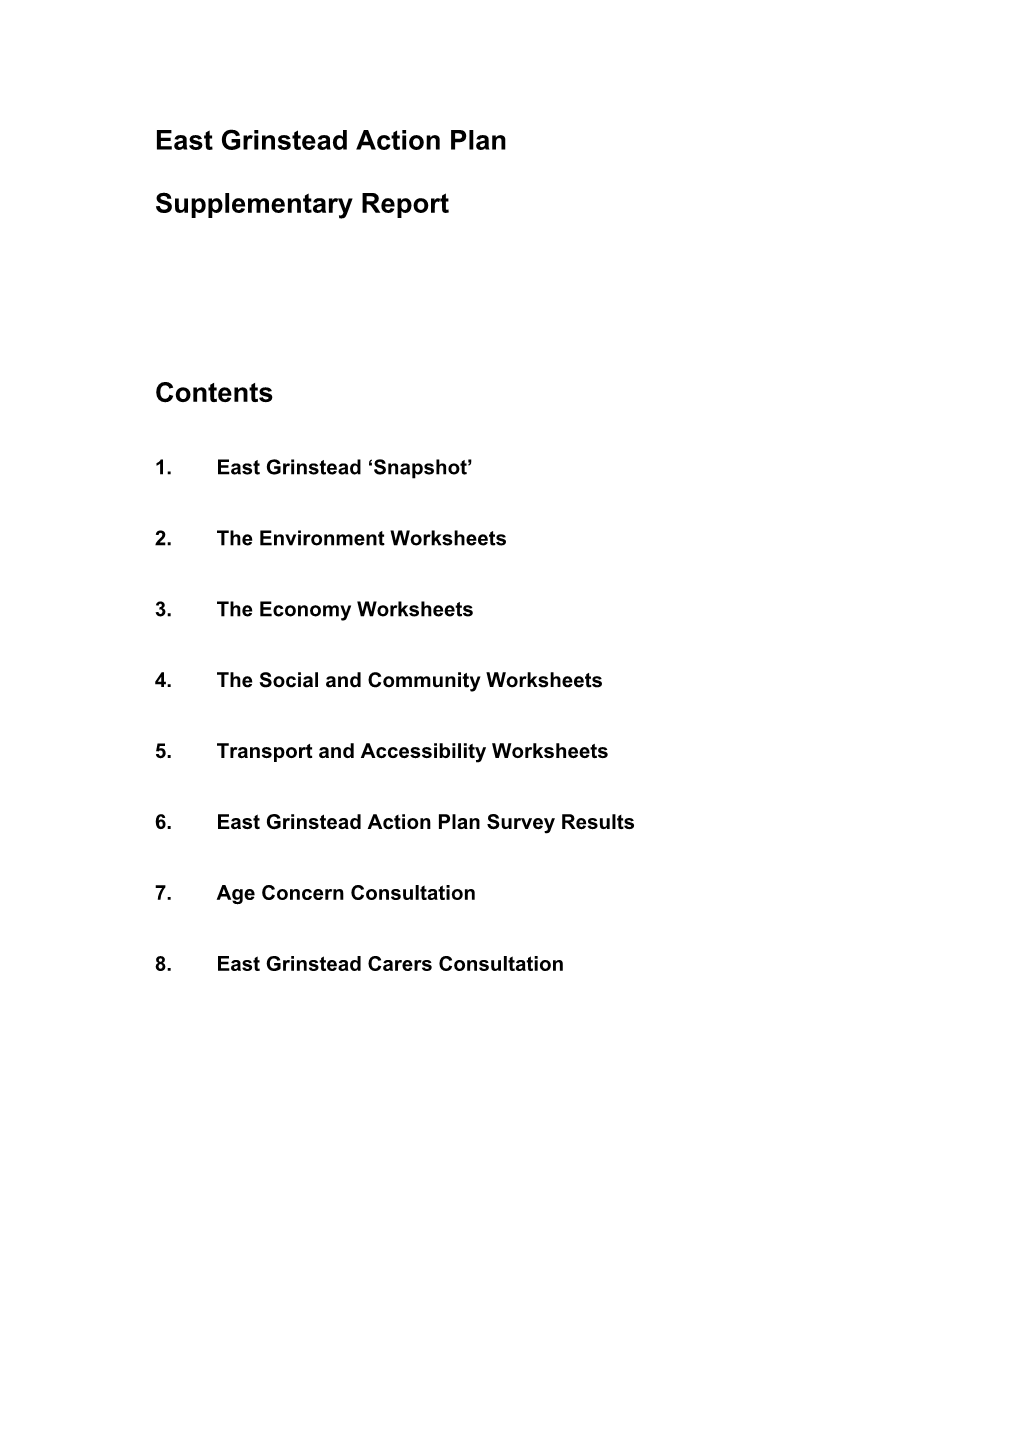 East Grinstead Action Plan Supplementary Report Contents